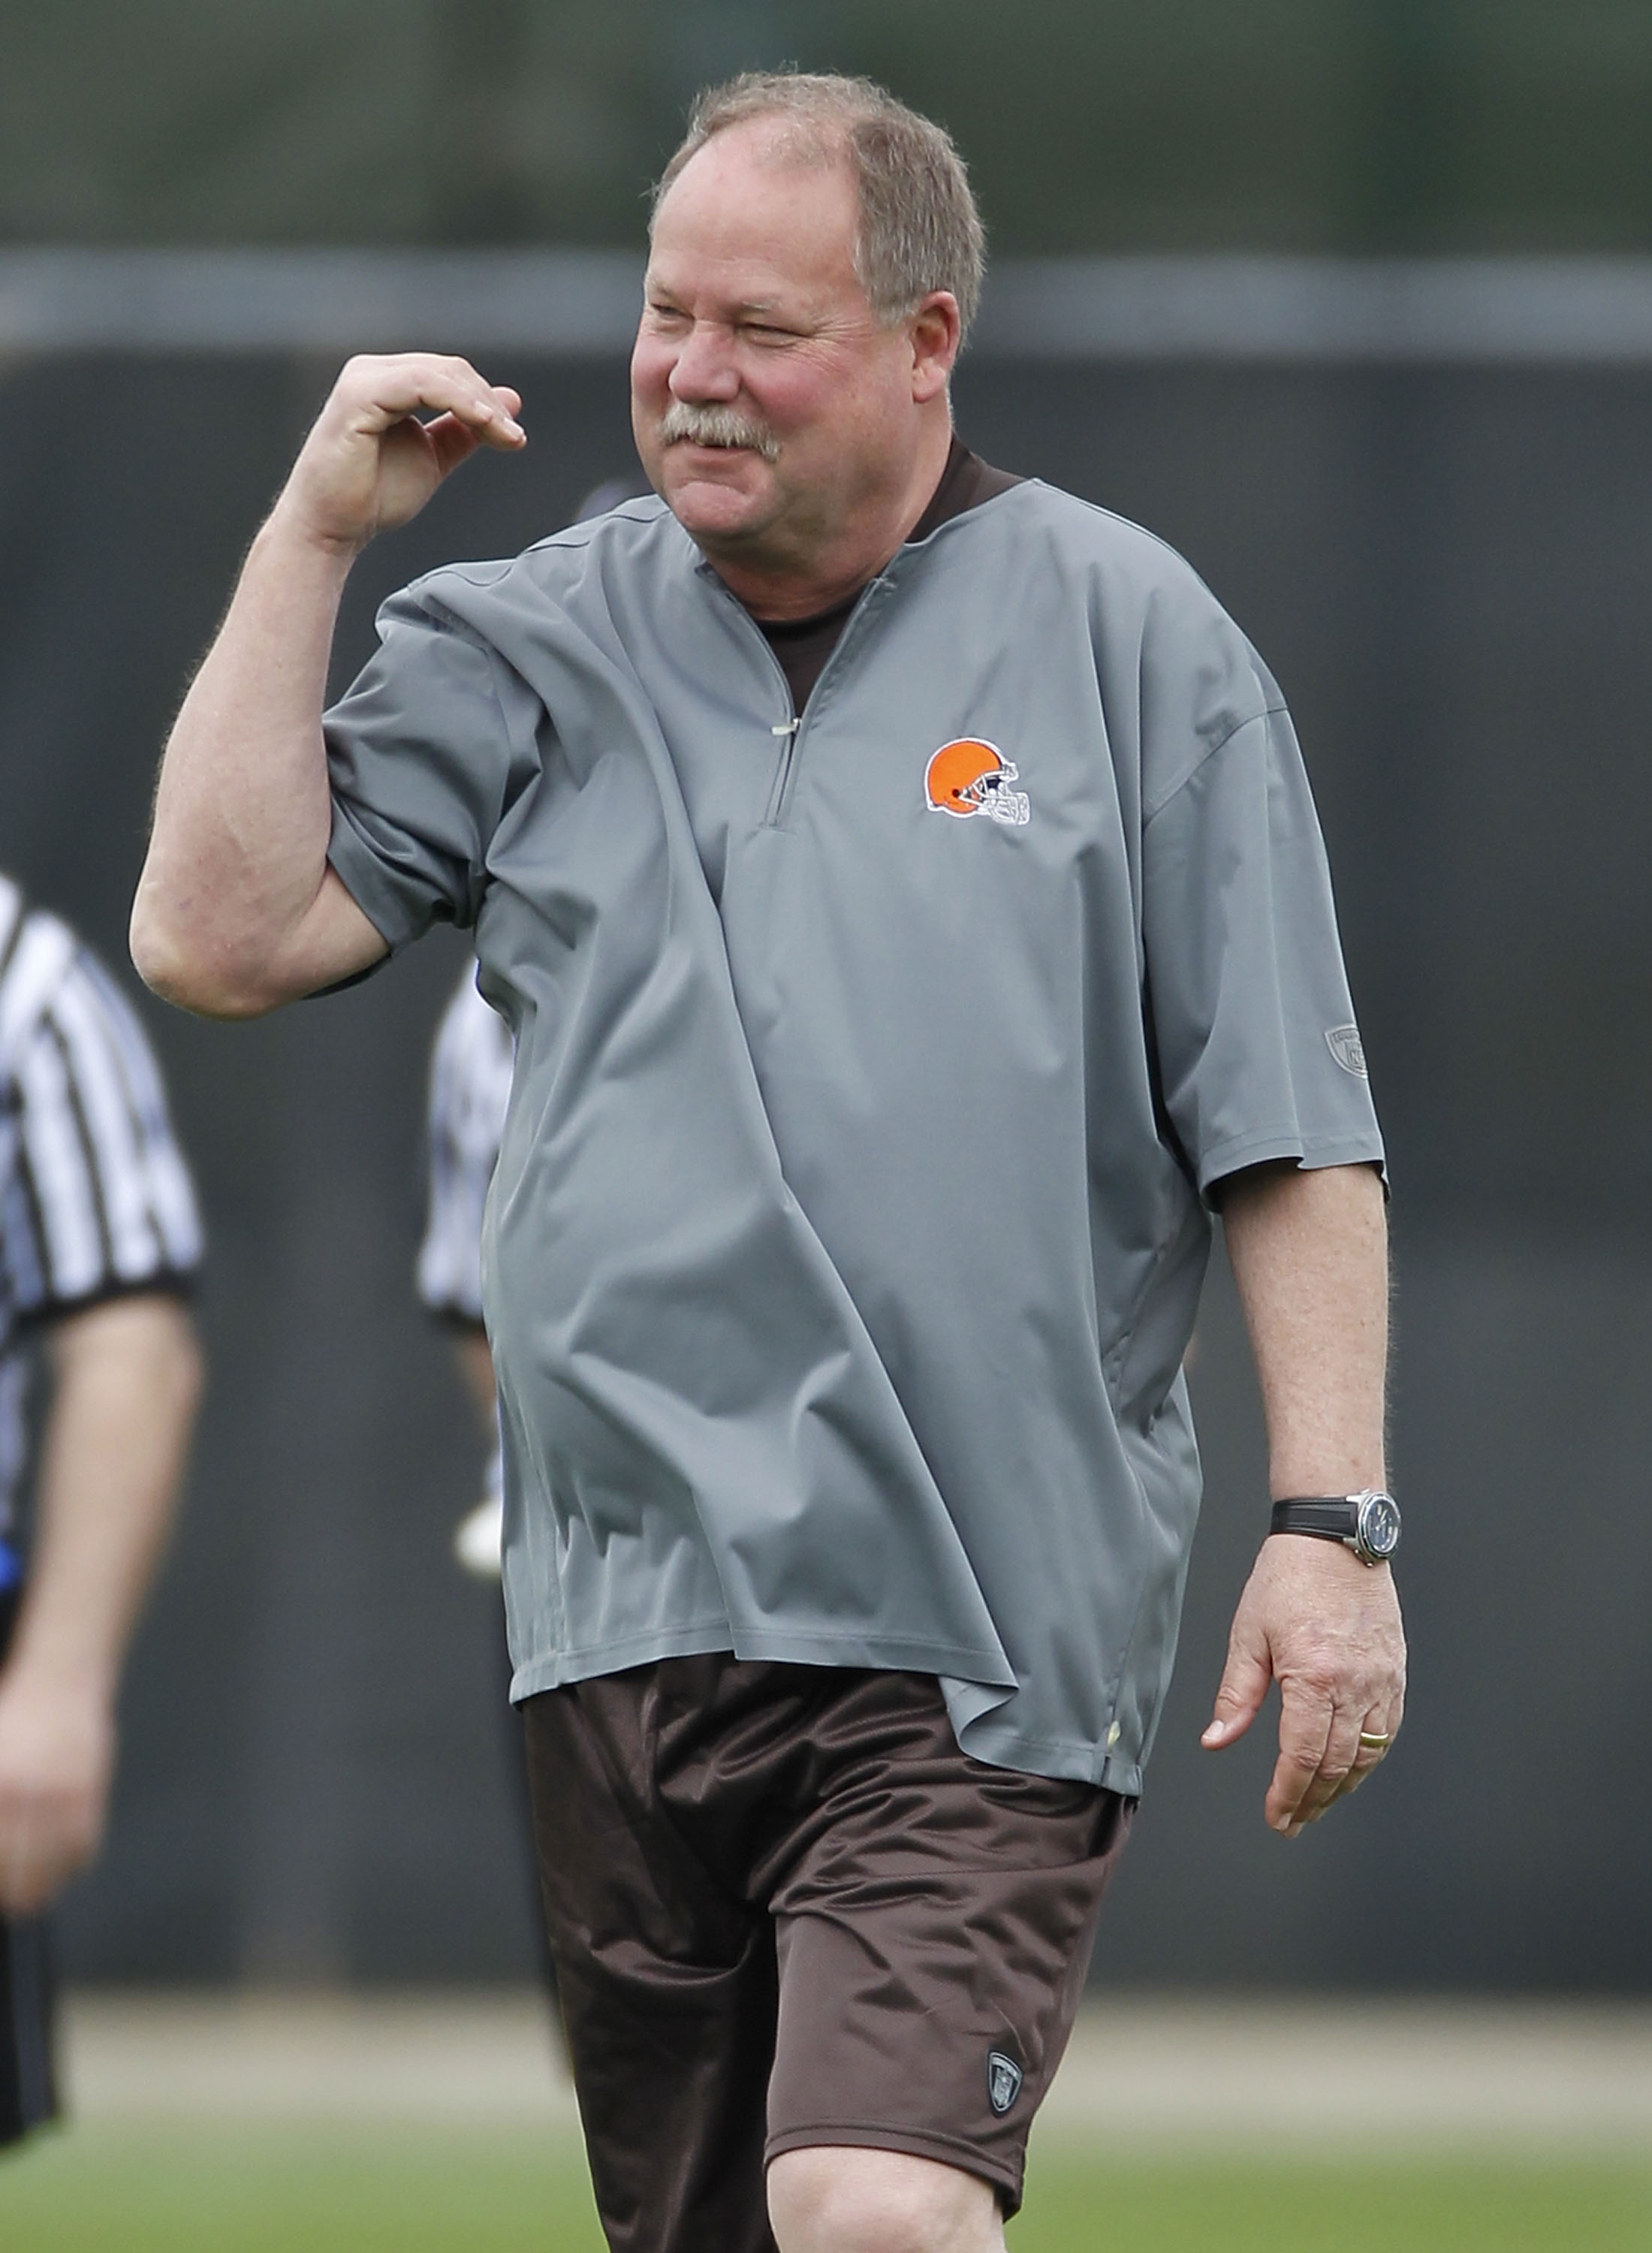 BEREA, OH - MAY 01:  Team president Mike Holmgren of the Cleveland Browns looks on during rookie mini camp at the Cleveland Browns Training and Administrative Complex on May 1, 2010 in Berea, Ohio.  (Photo by Gregory Shamus/Getty Images)